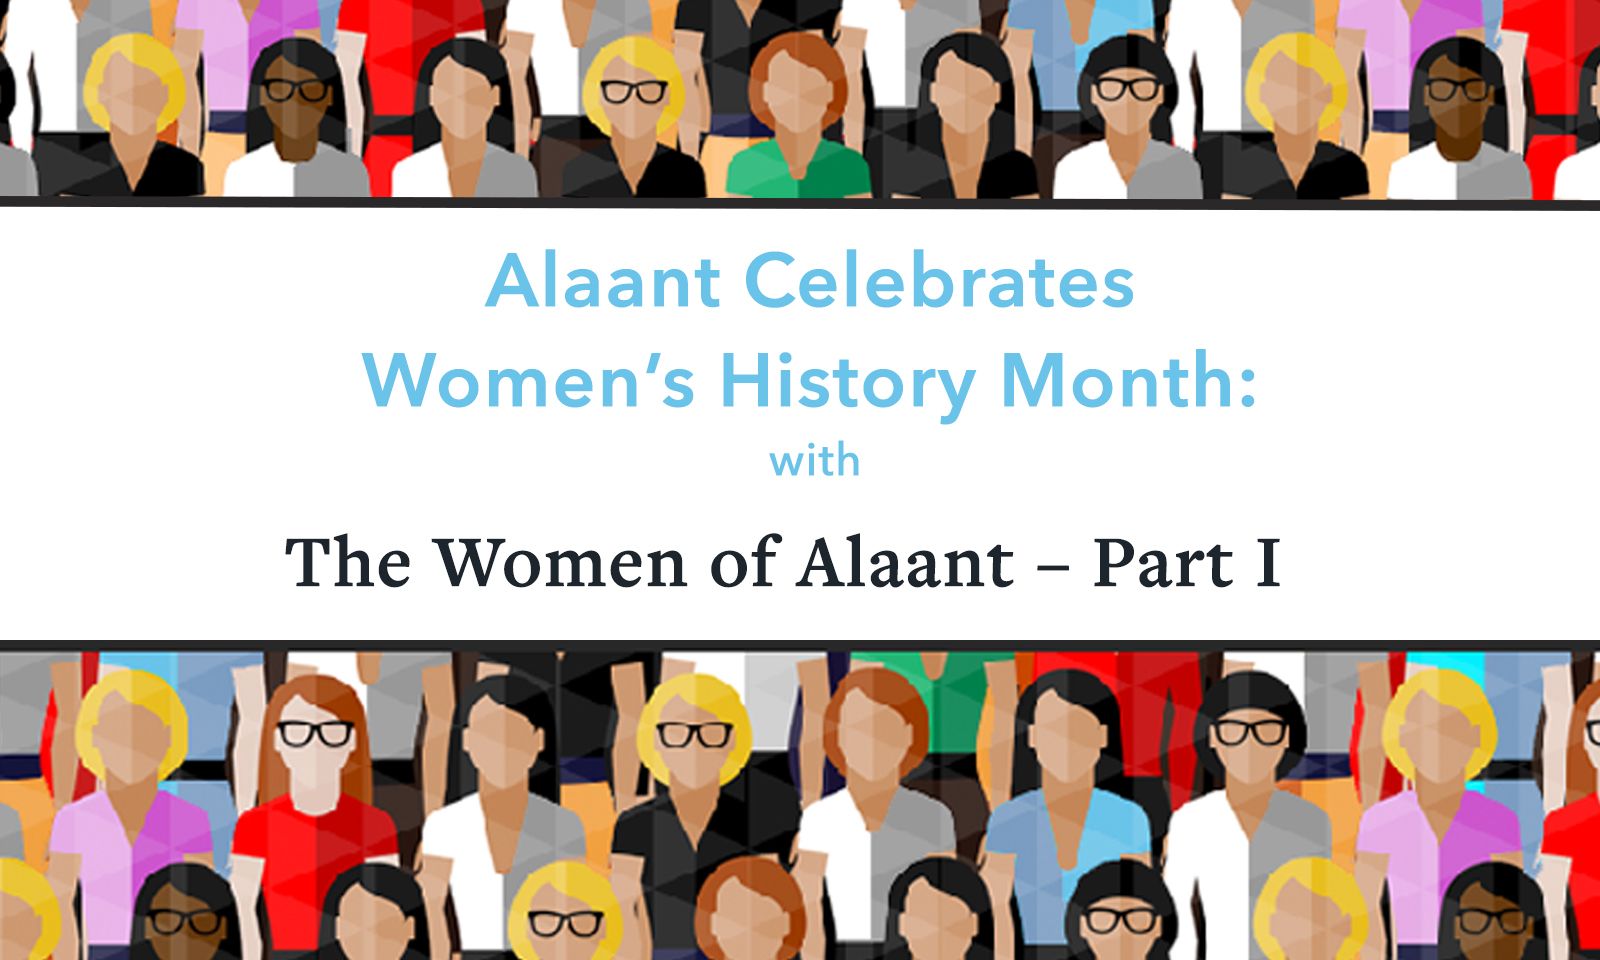 Alaant Celebrates Women’s History Month with The Women of Alaant – Part I